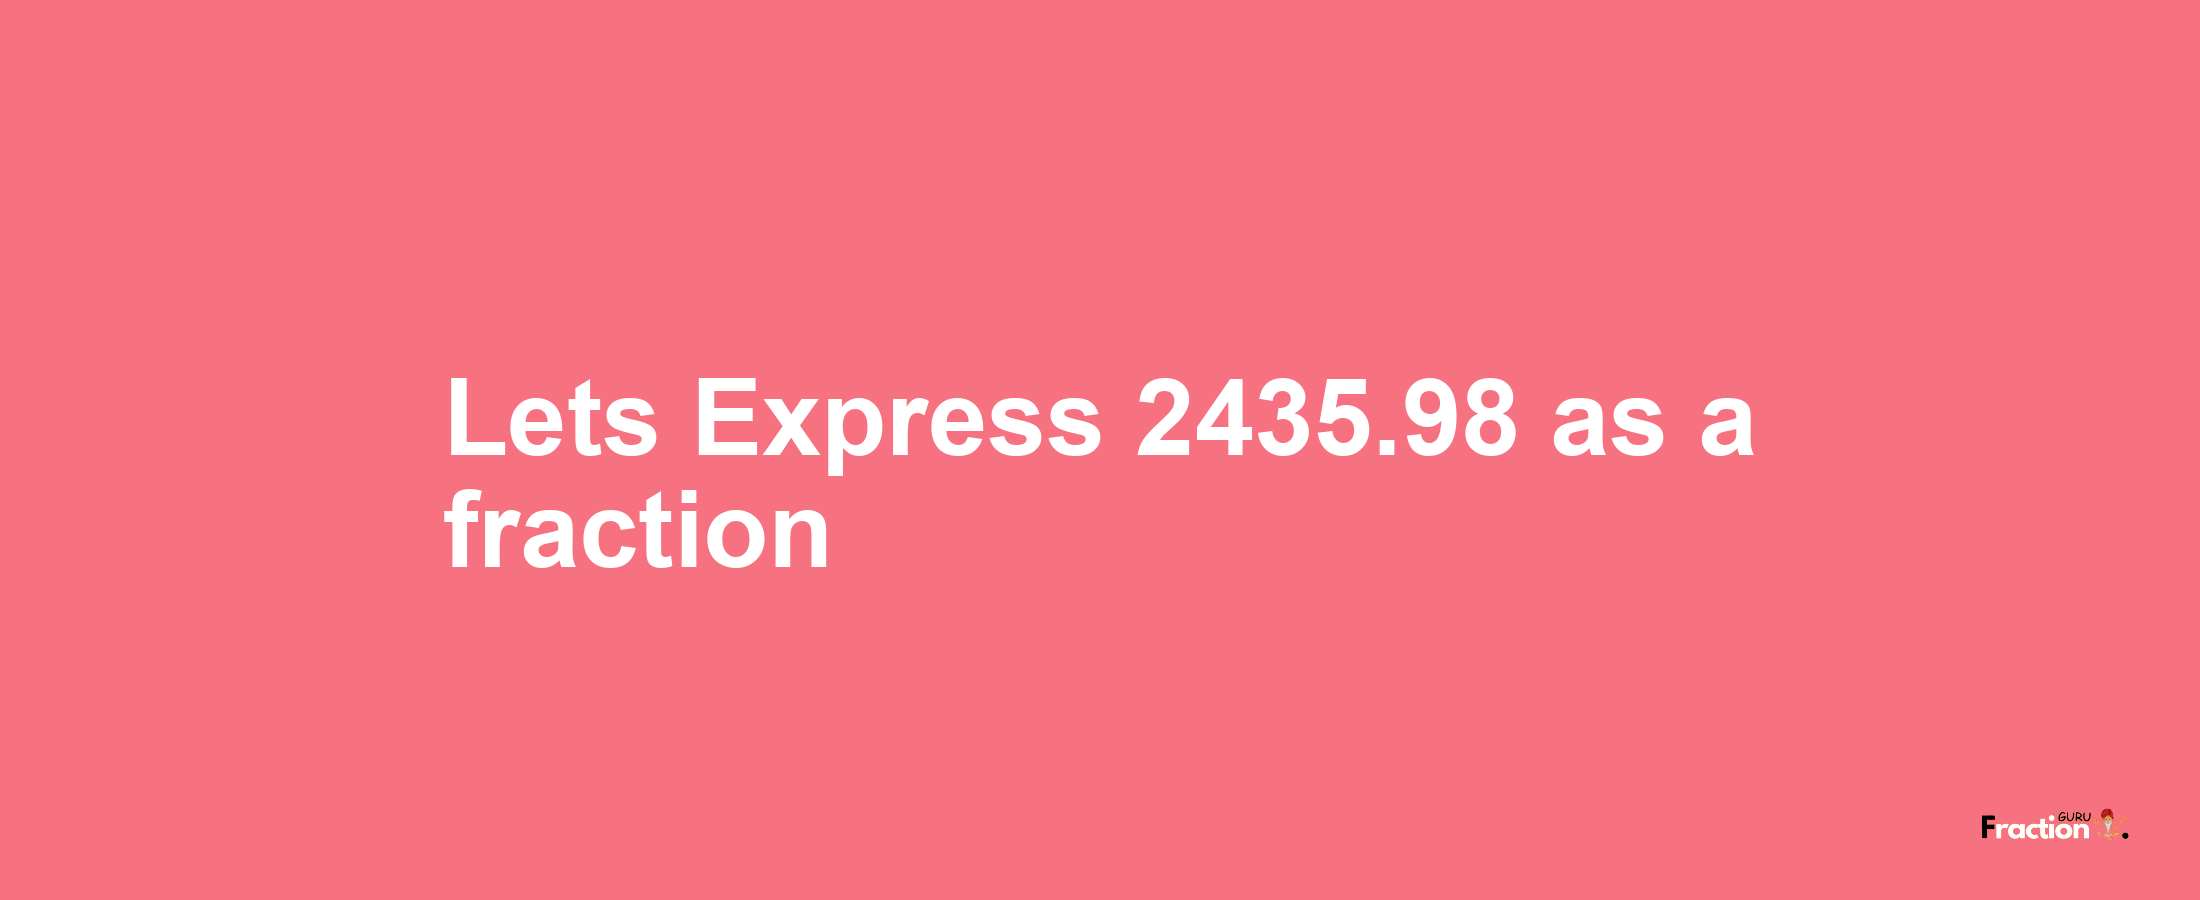 Lets Express 2435.98 as afraction